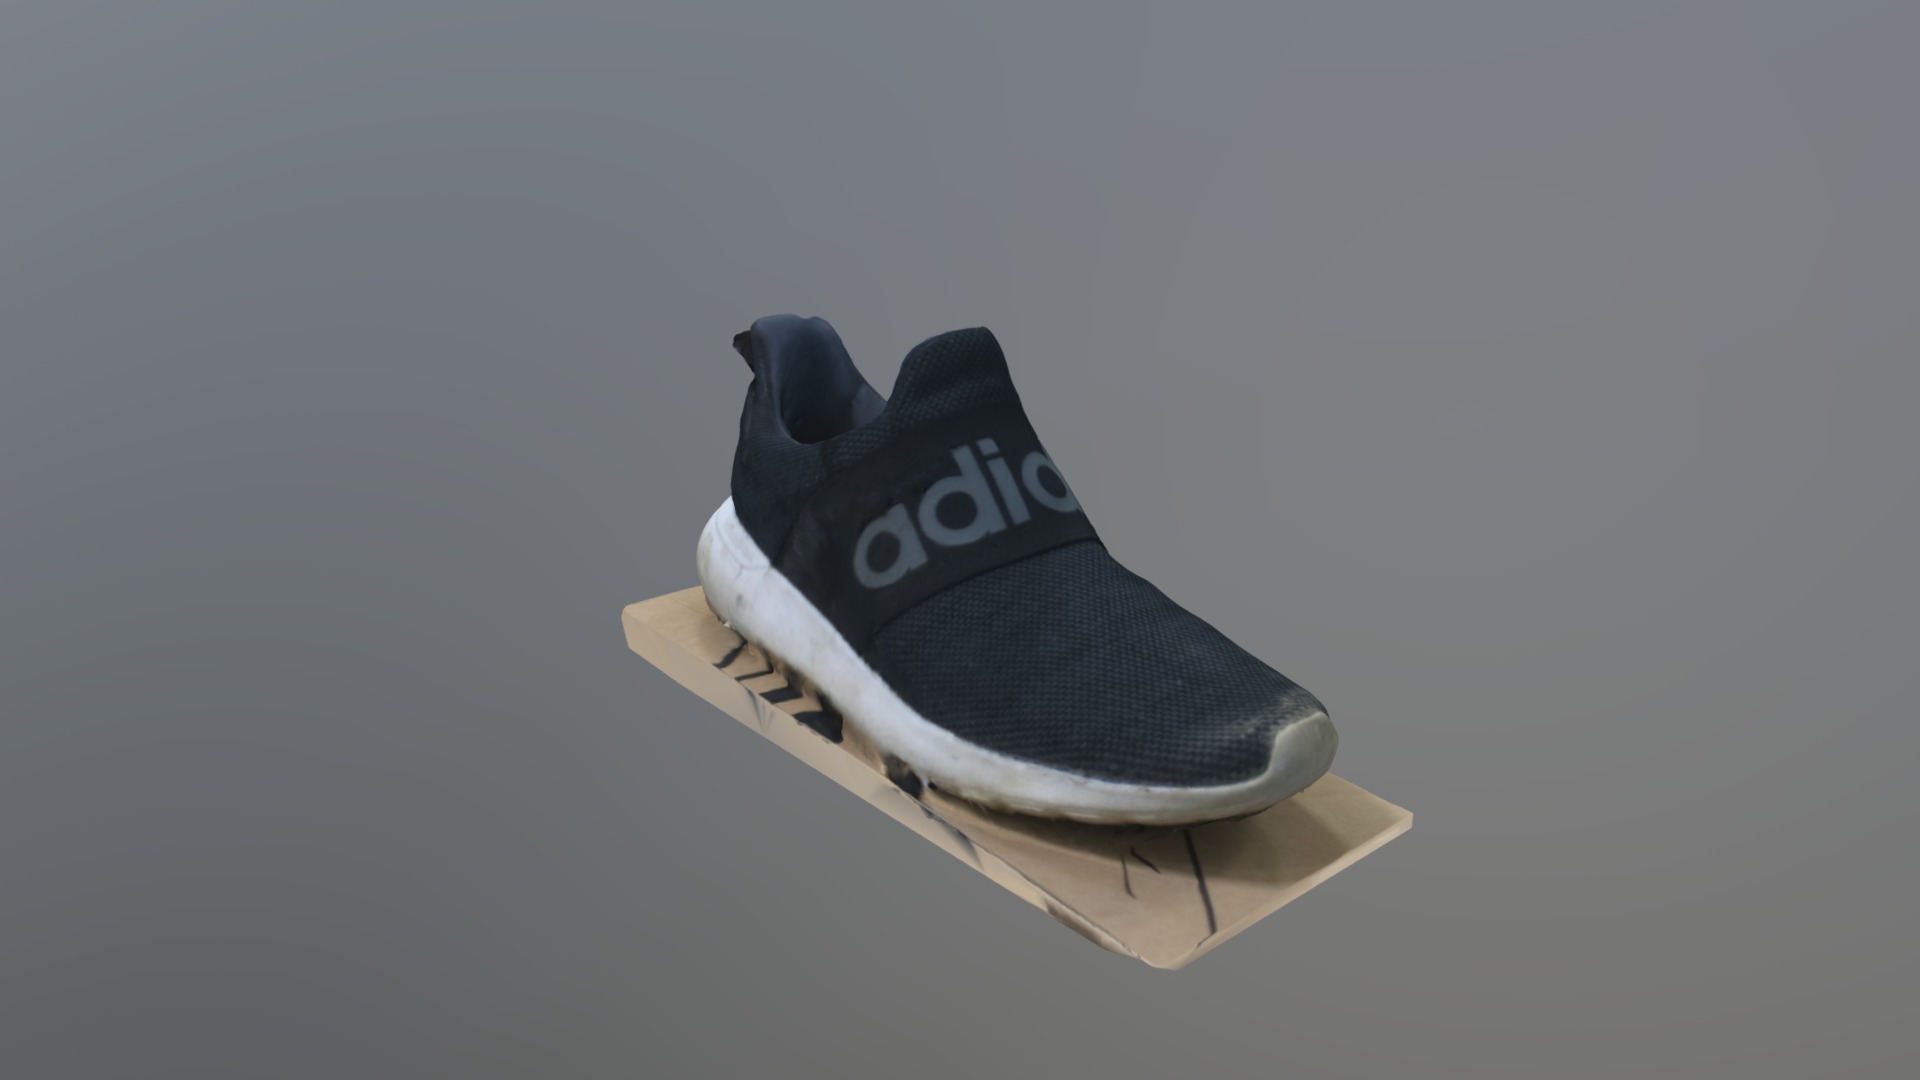 3D model 6m - This is a 3D model of the 6m. The 3D model is about a black and white shoe.